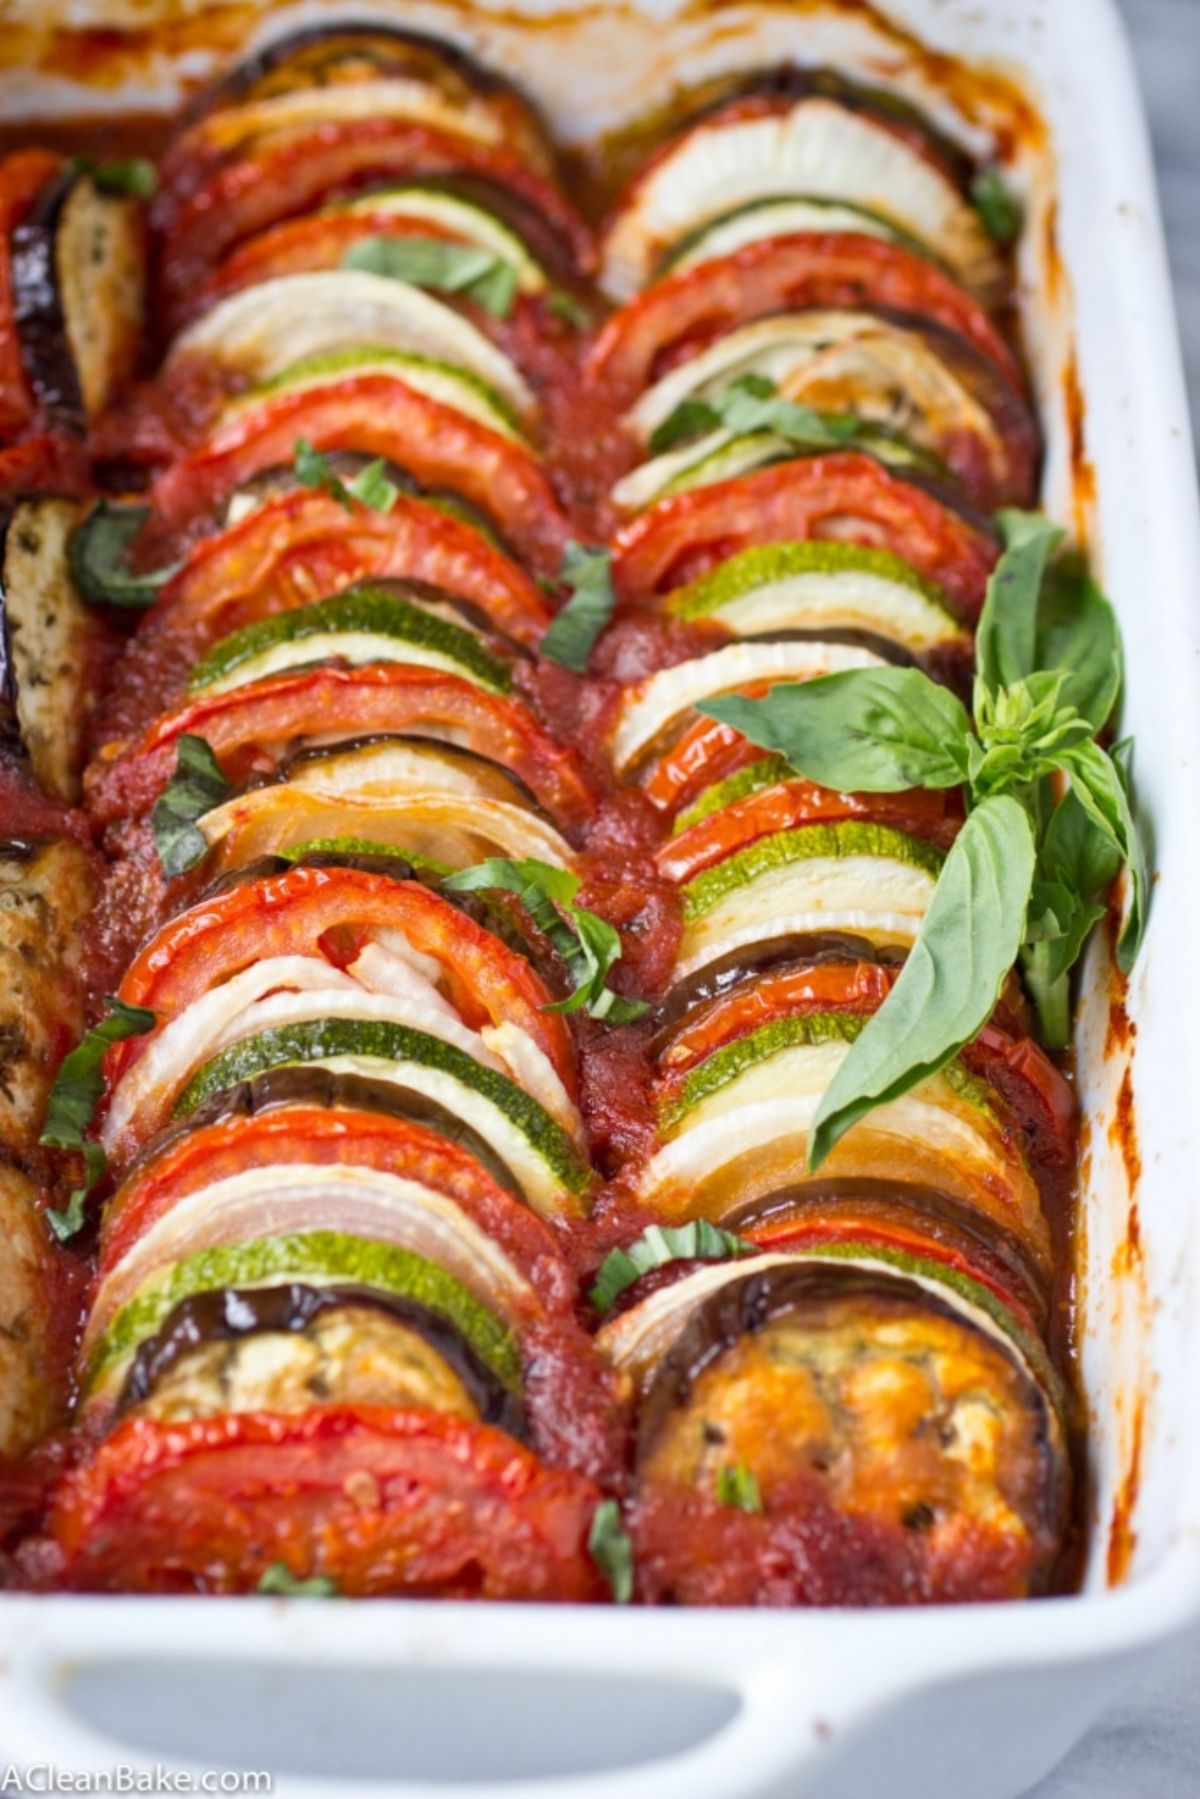 A casserole dish with slices of roasted aubergine, tomato and zucchini